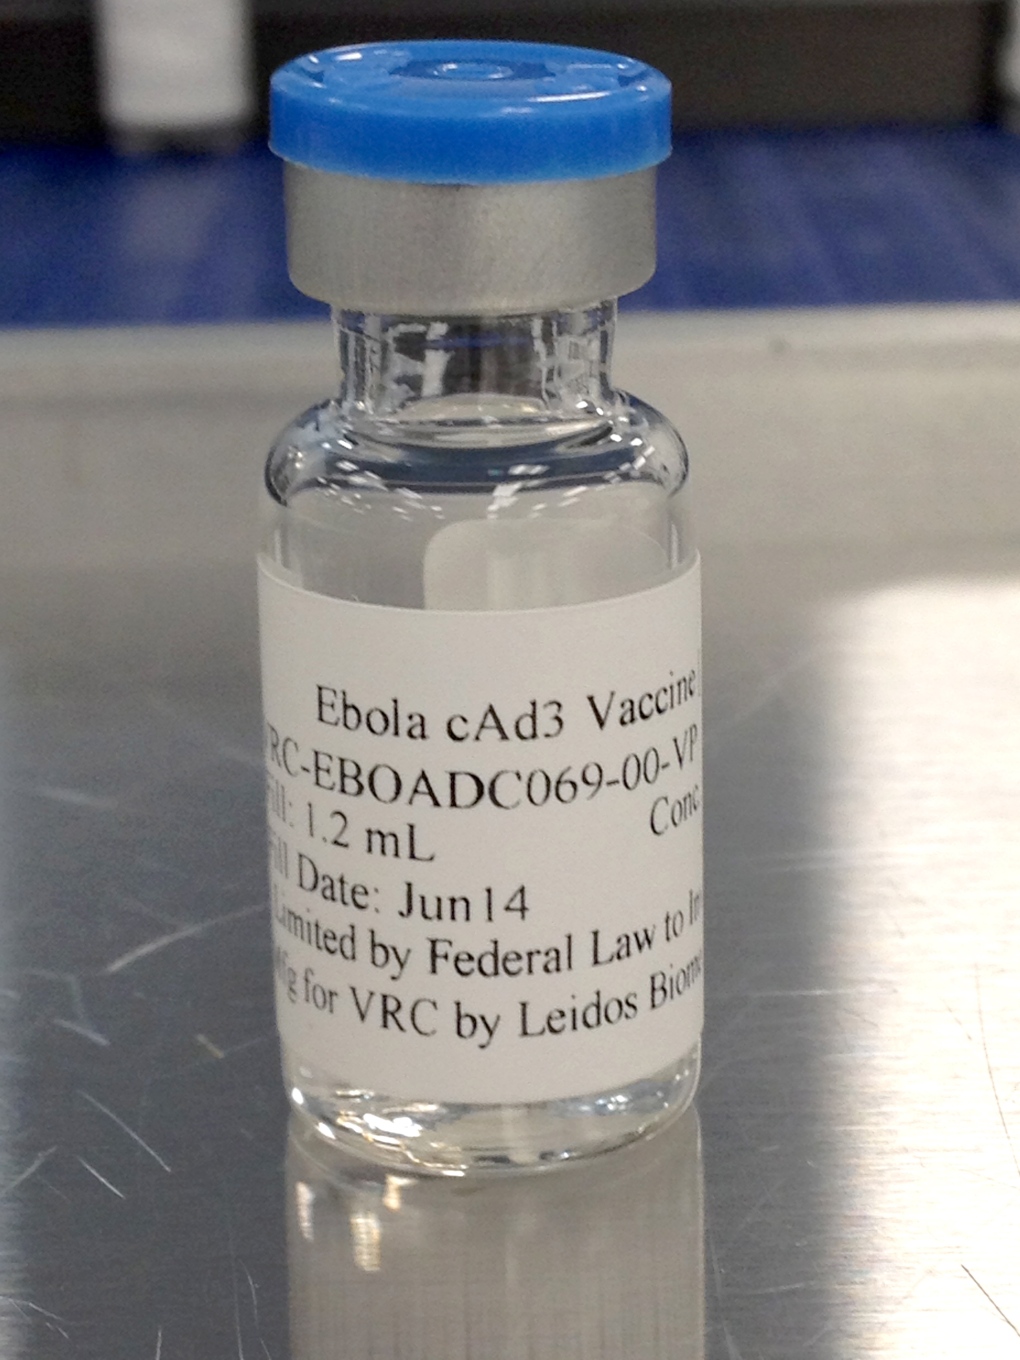 Ebola vaccine from GSK